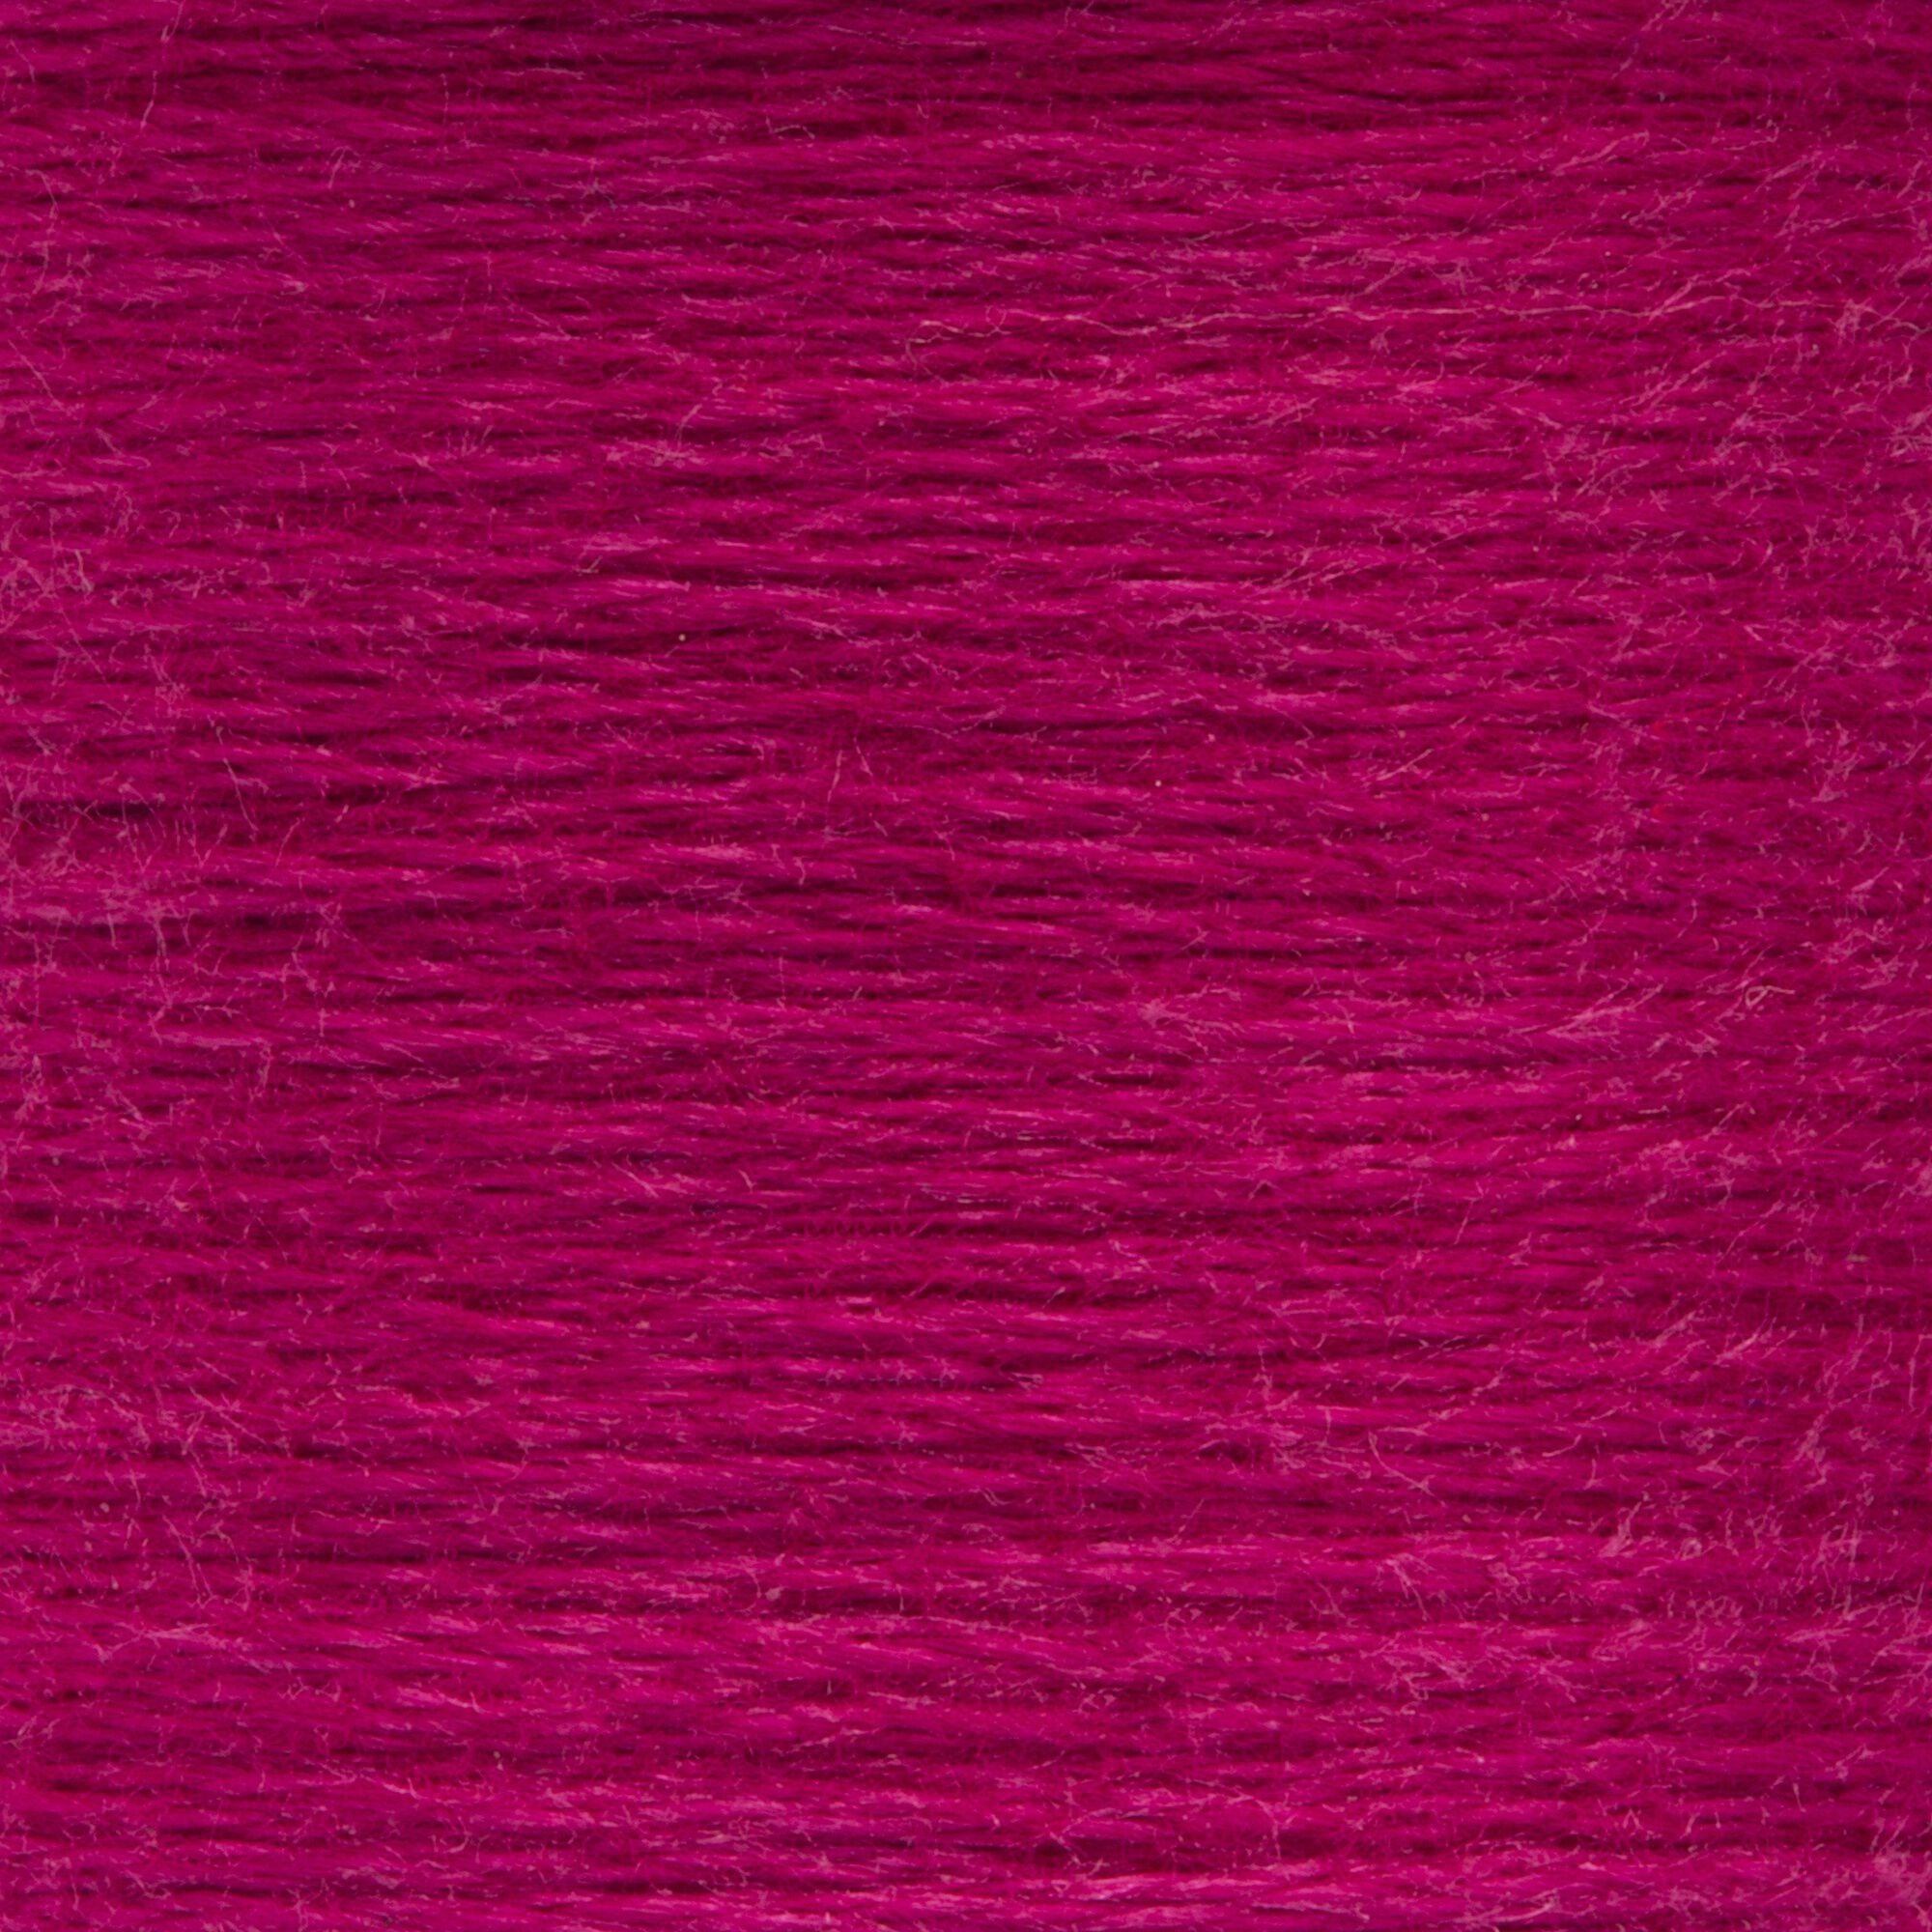 Anchor Embroidery Floss in Antique Rose Vy Dk